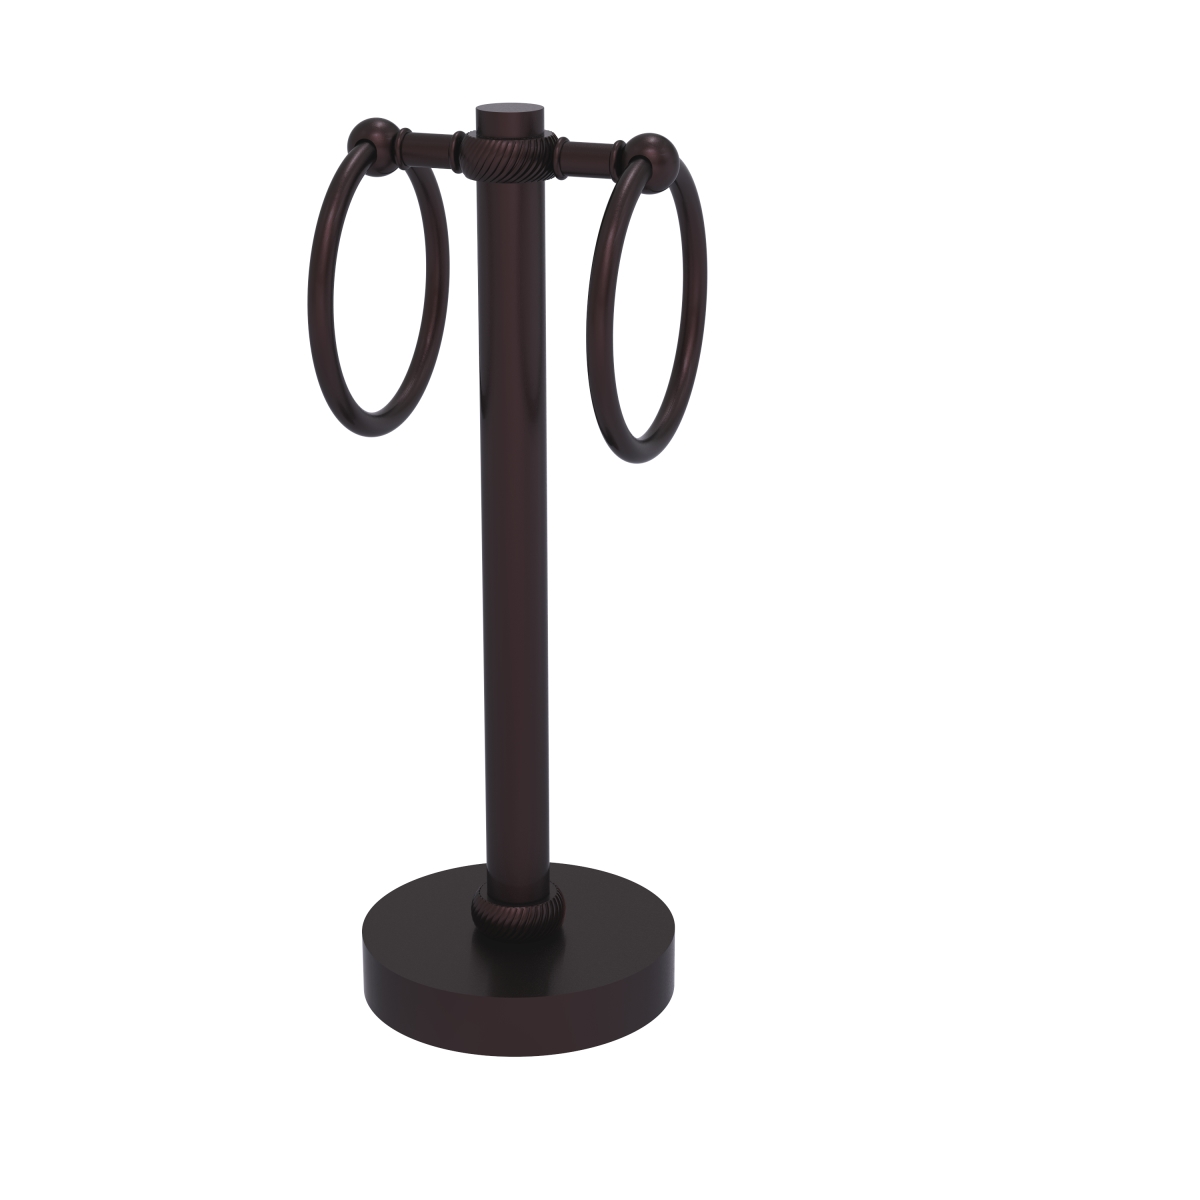 953t-abz Vanity Top 2 Towel Ring Guest Towel Holder With Twisted Accents, Antique Bronze